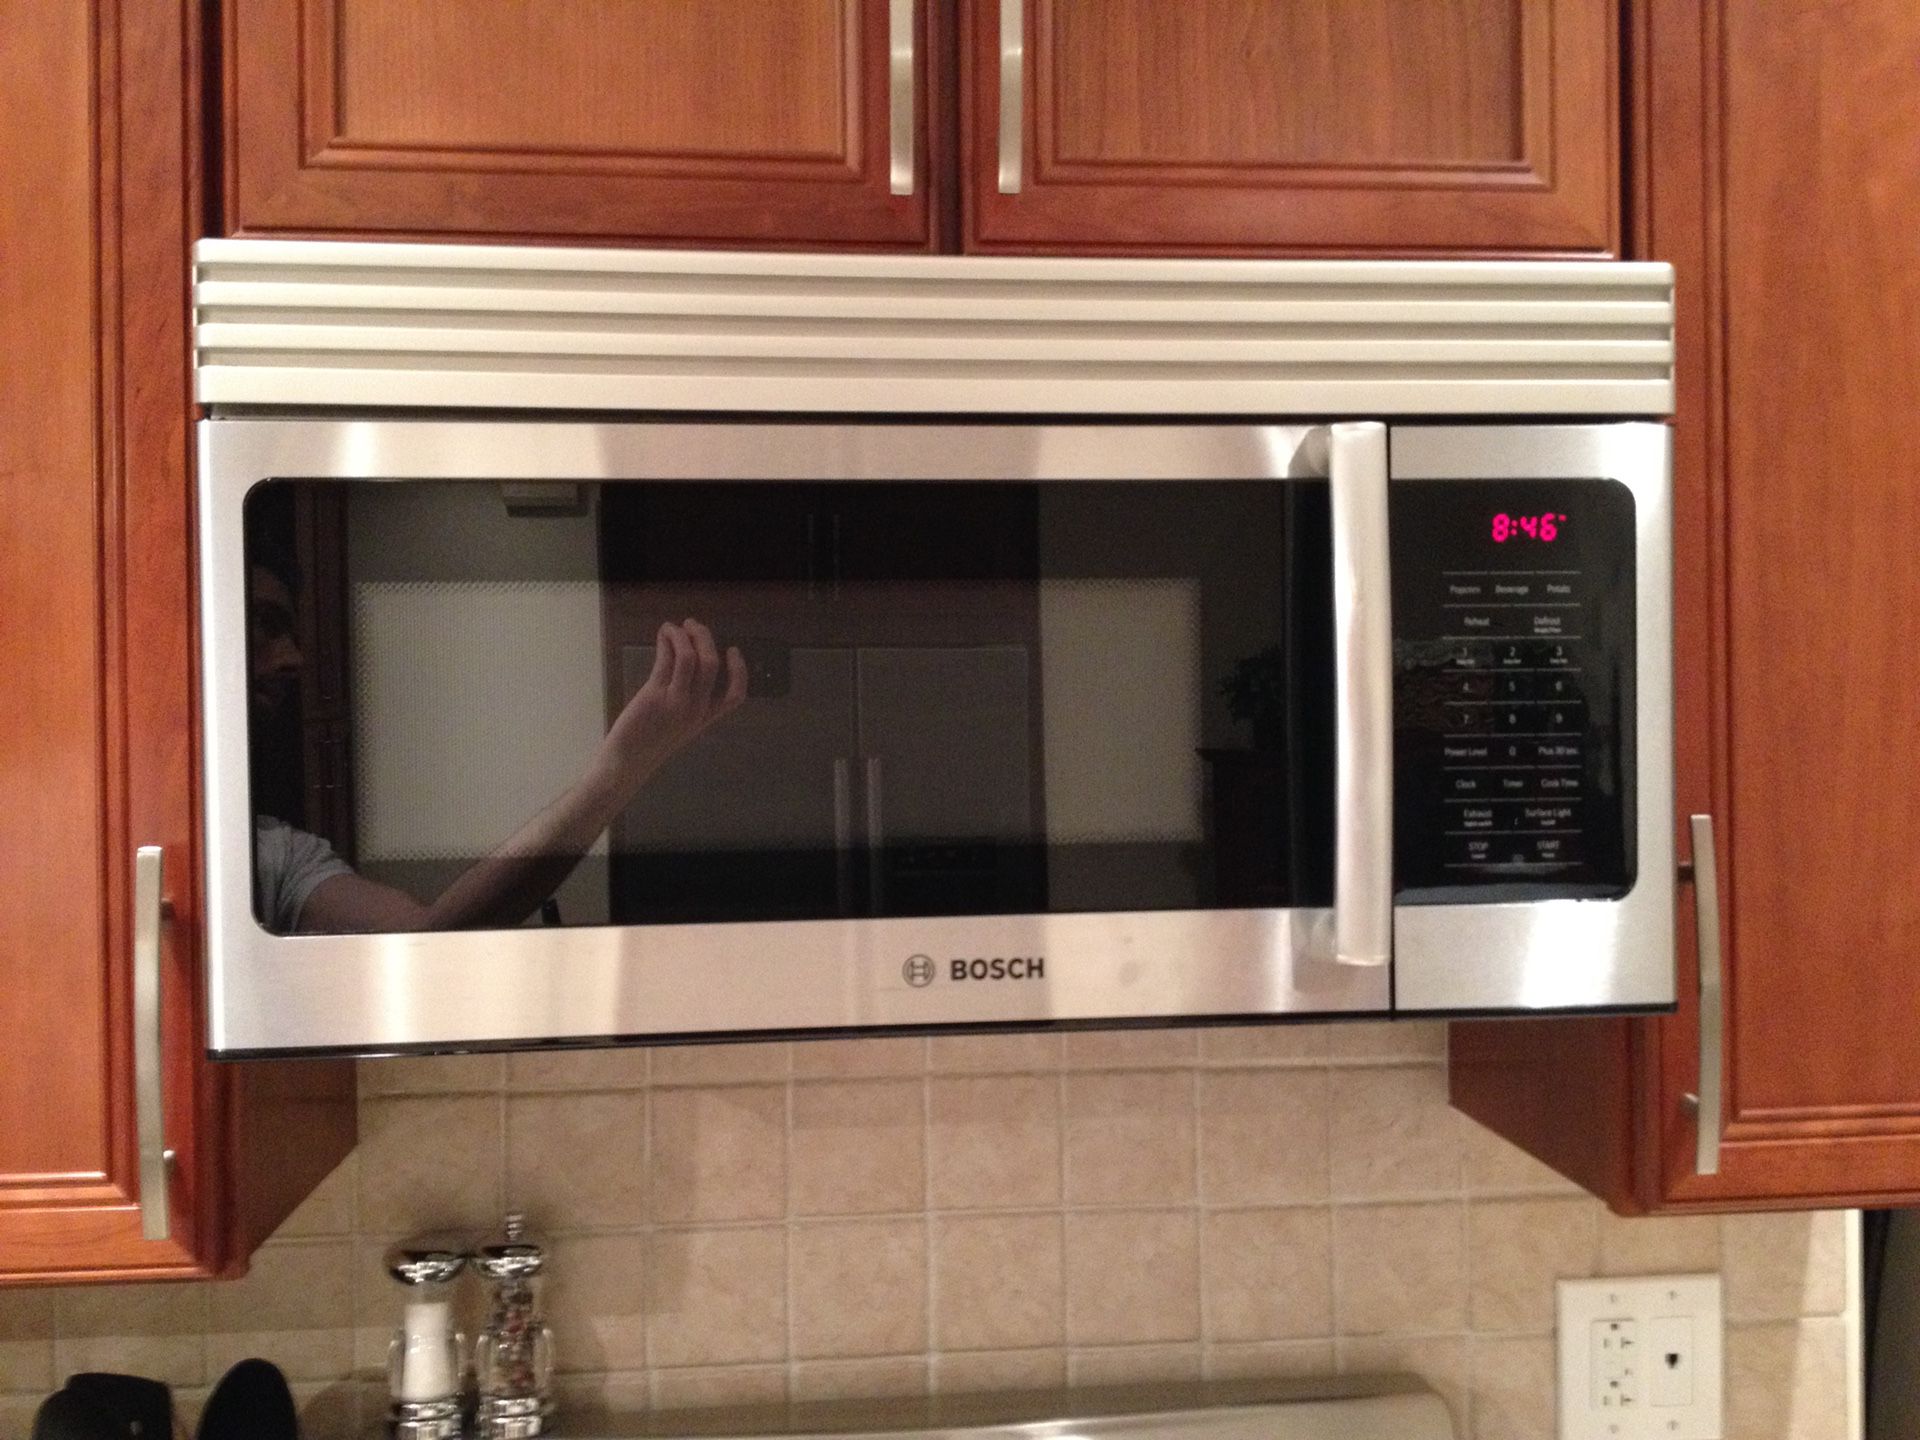 Stainless Steak Bosch Over-The-Range Microwave